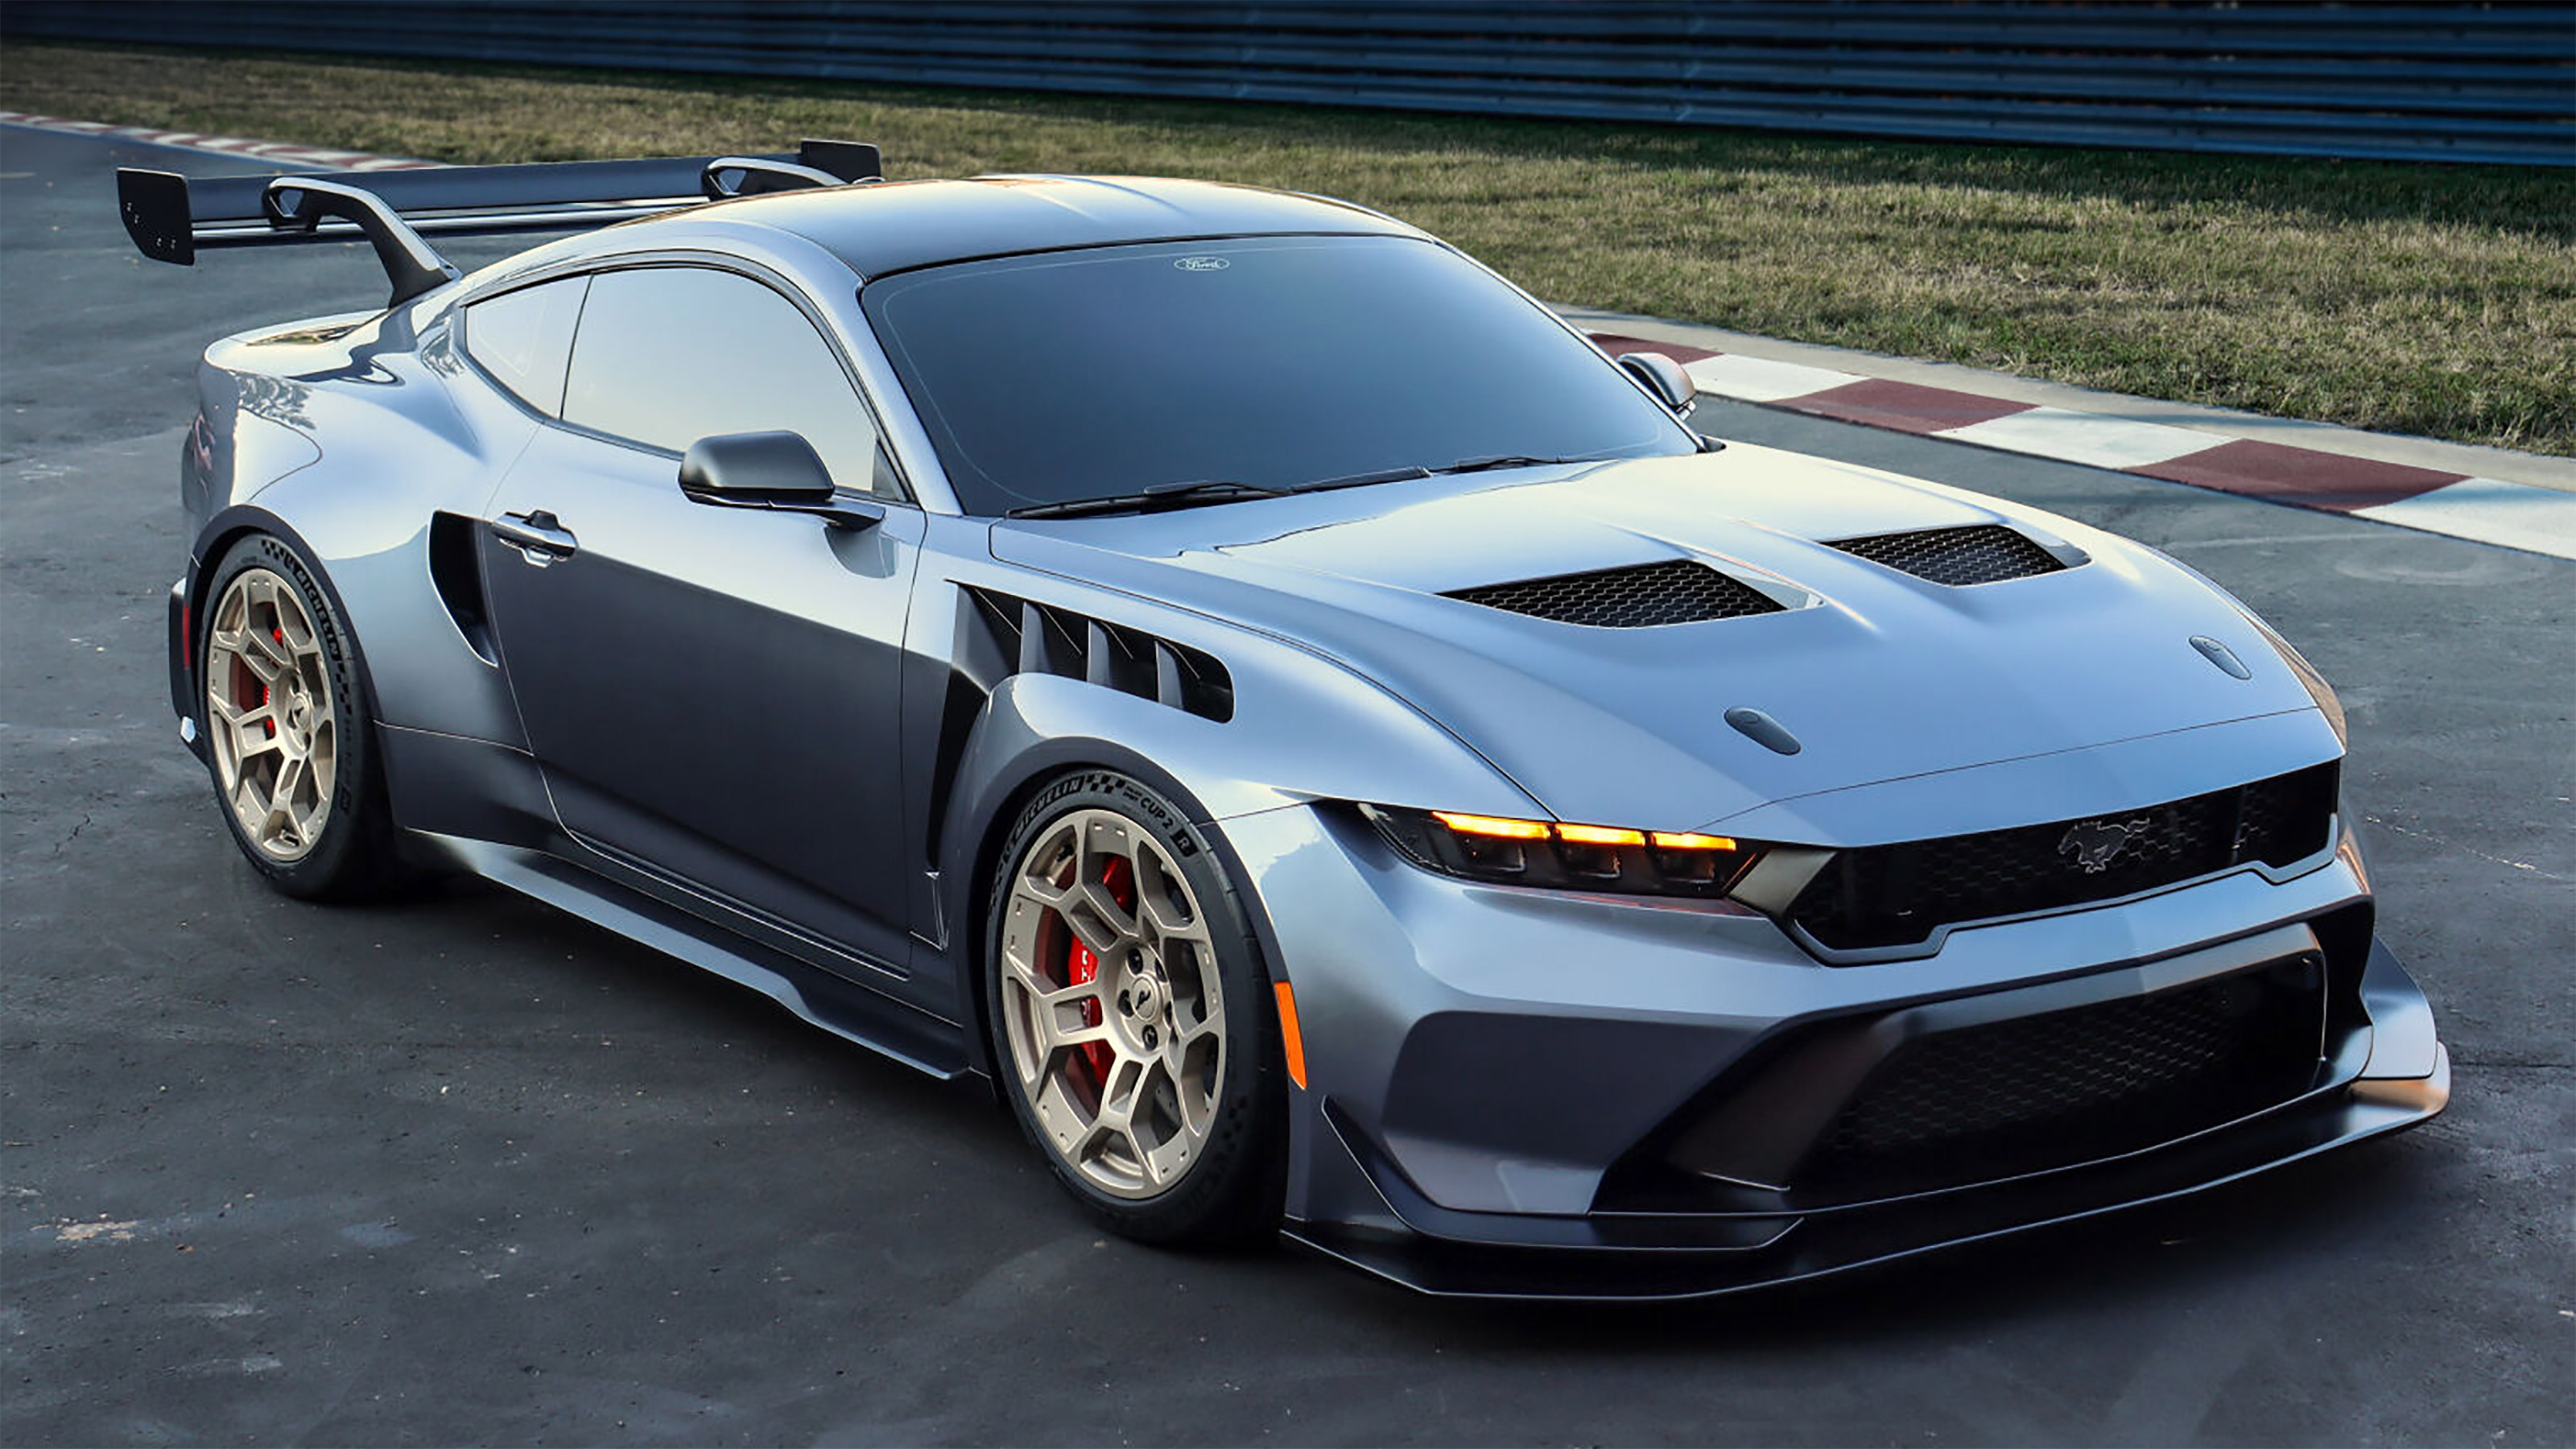 Limited-run Ford Mustang GTD revealed as GT3-inspired road car